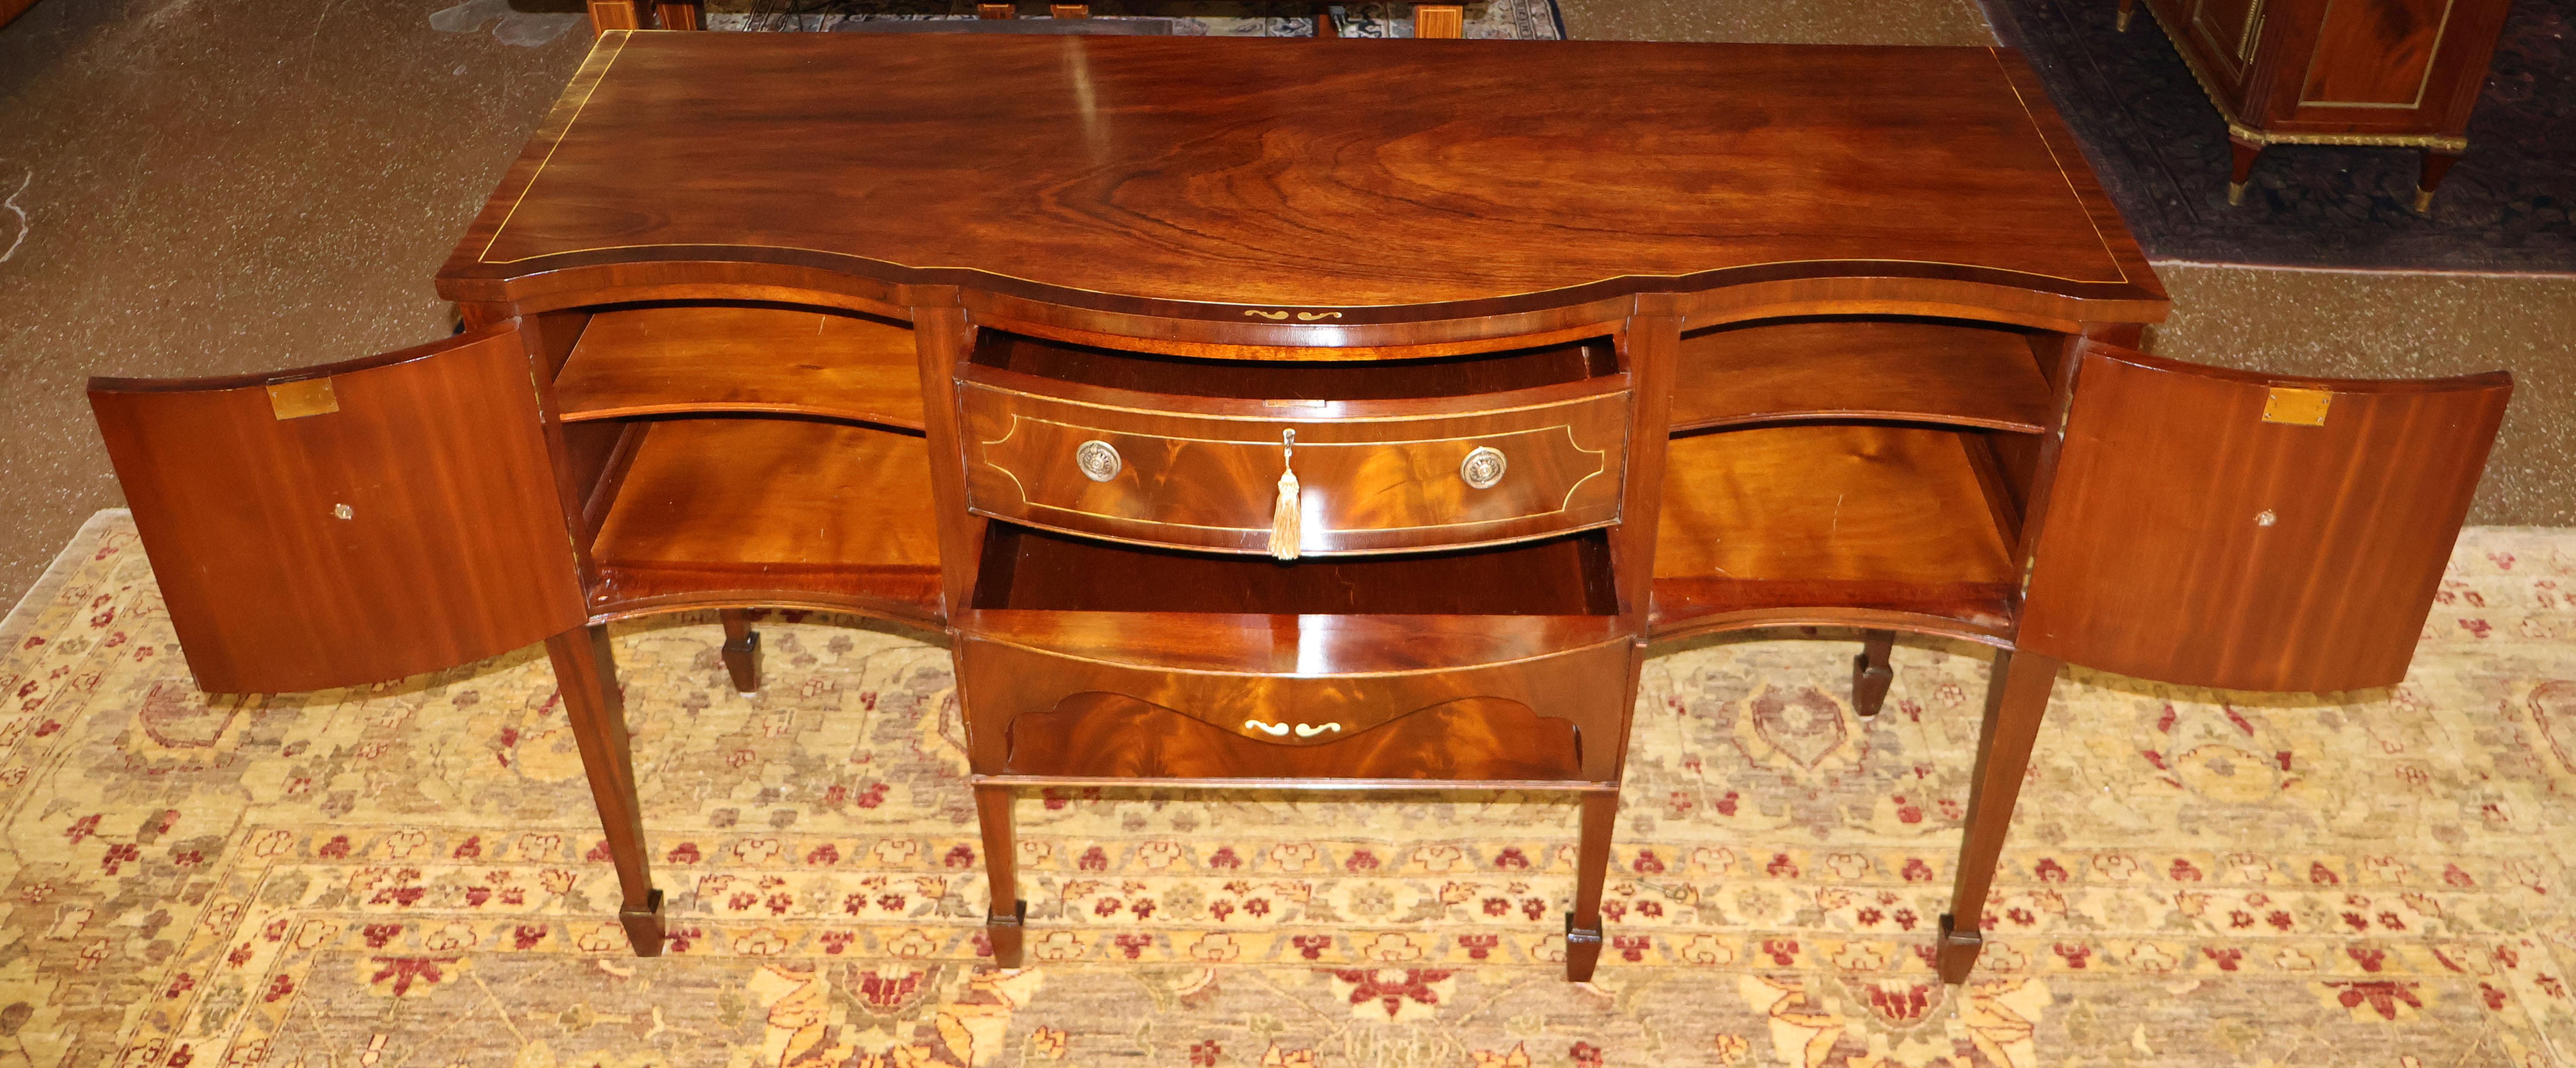 Early 20th Century English Flame Mahogany Federal Style Sideboard  9